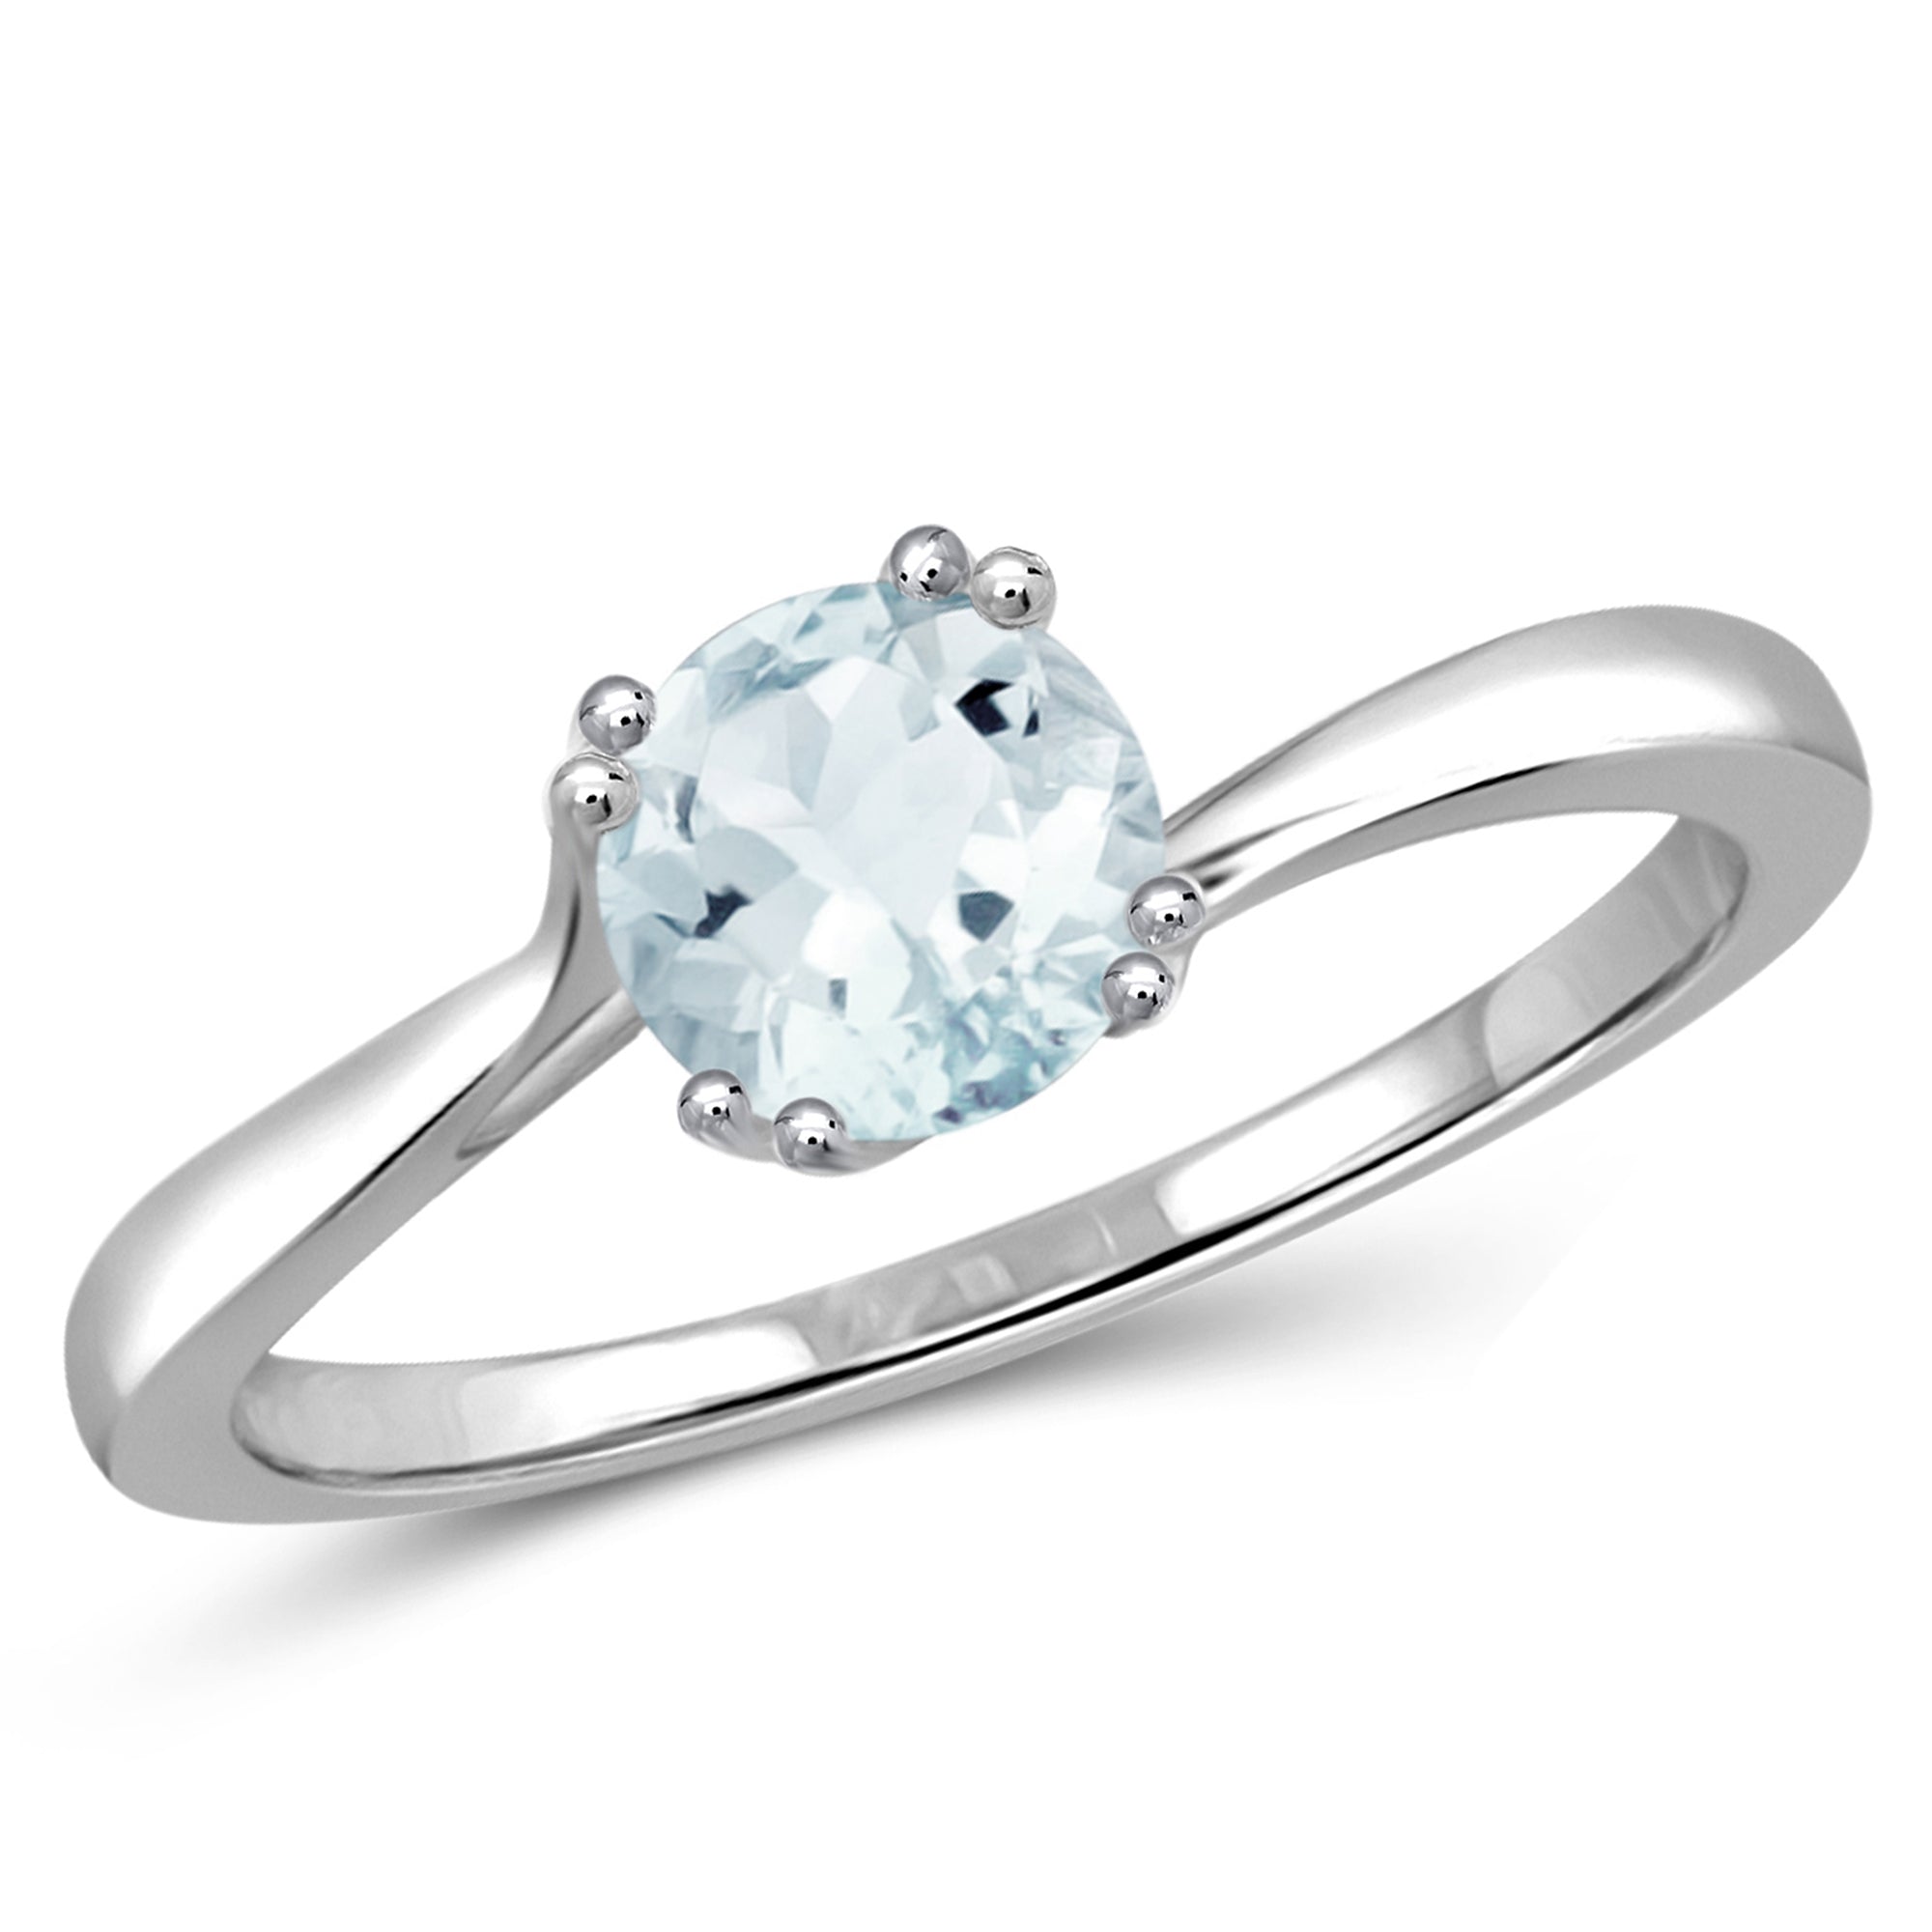 Aquamarine Ring March Birthstone Jewelry – 0.40 Carat Aquamarine Sterling Silver Ring Jewelry with White Diamond Accent – Gemstone Rings with Hypoallergenic Sterling Silver Band